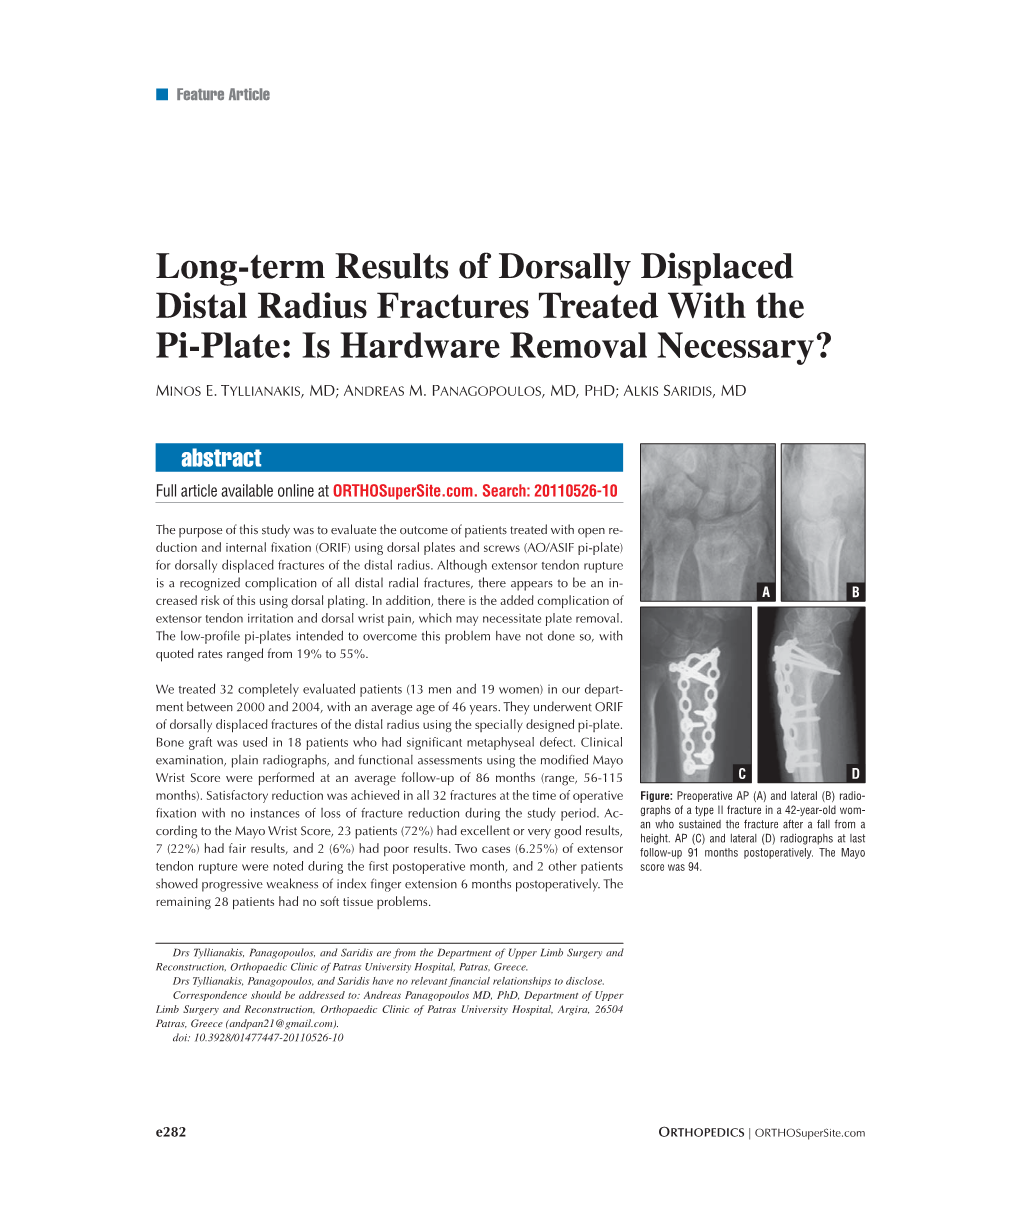 Long-Term Results of Dorsally Displaced Distal Radius Fractures Treated with the Pi-Plate: Is Hardware Removal Necessary?